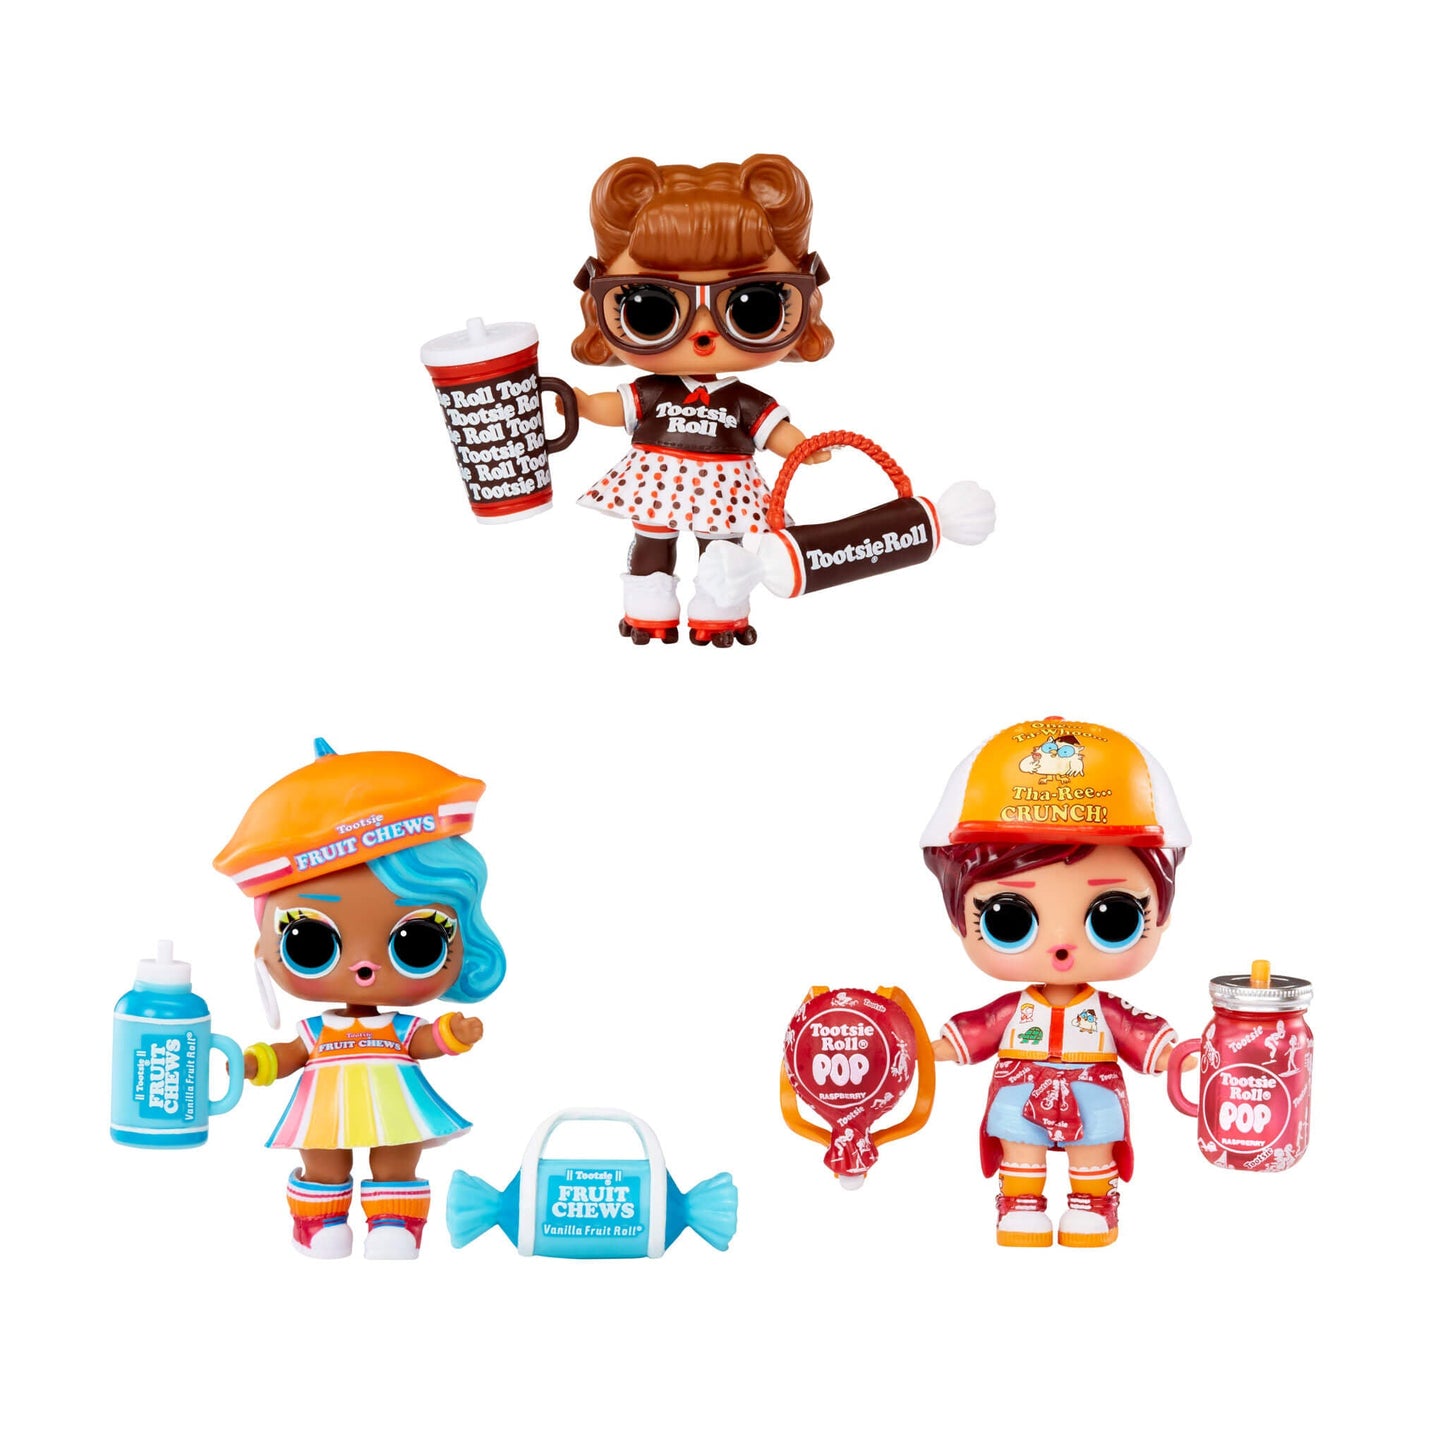 L.O.L. Surprise! Loves Mini Sweets S3 Deluxe Tootsie Series 3 with 3 Dolls